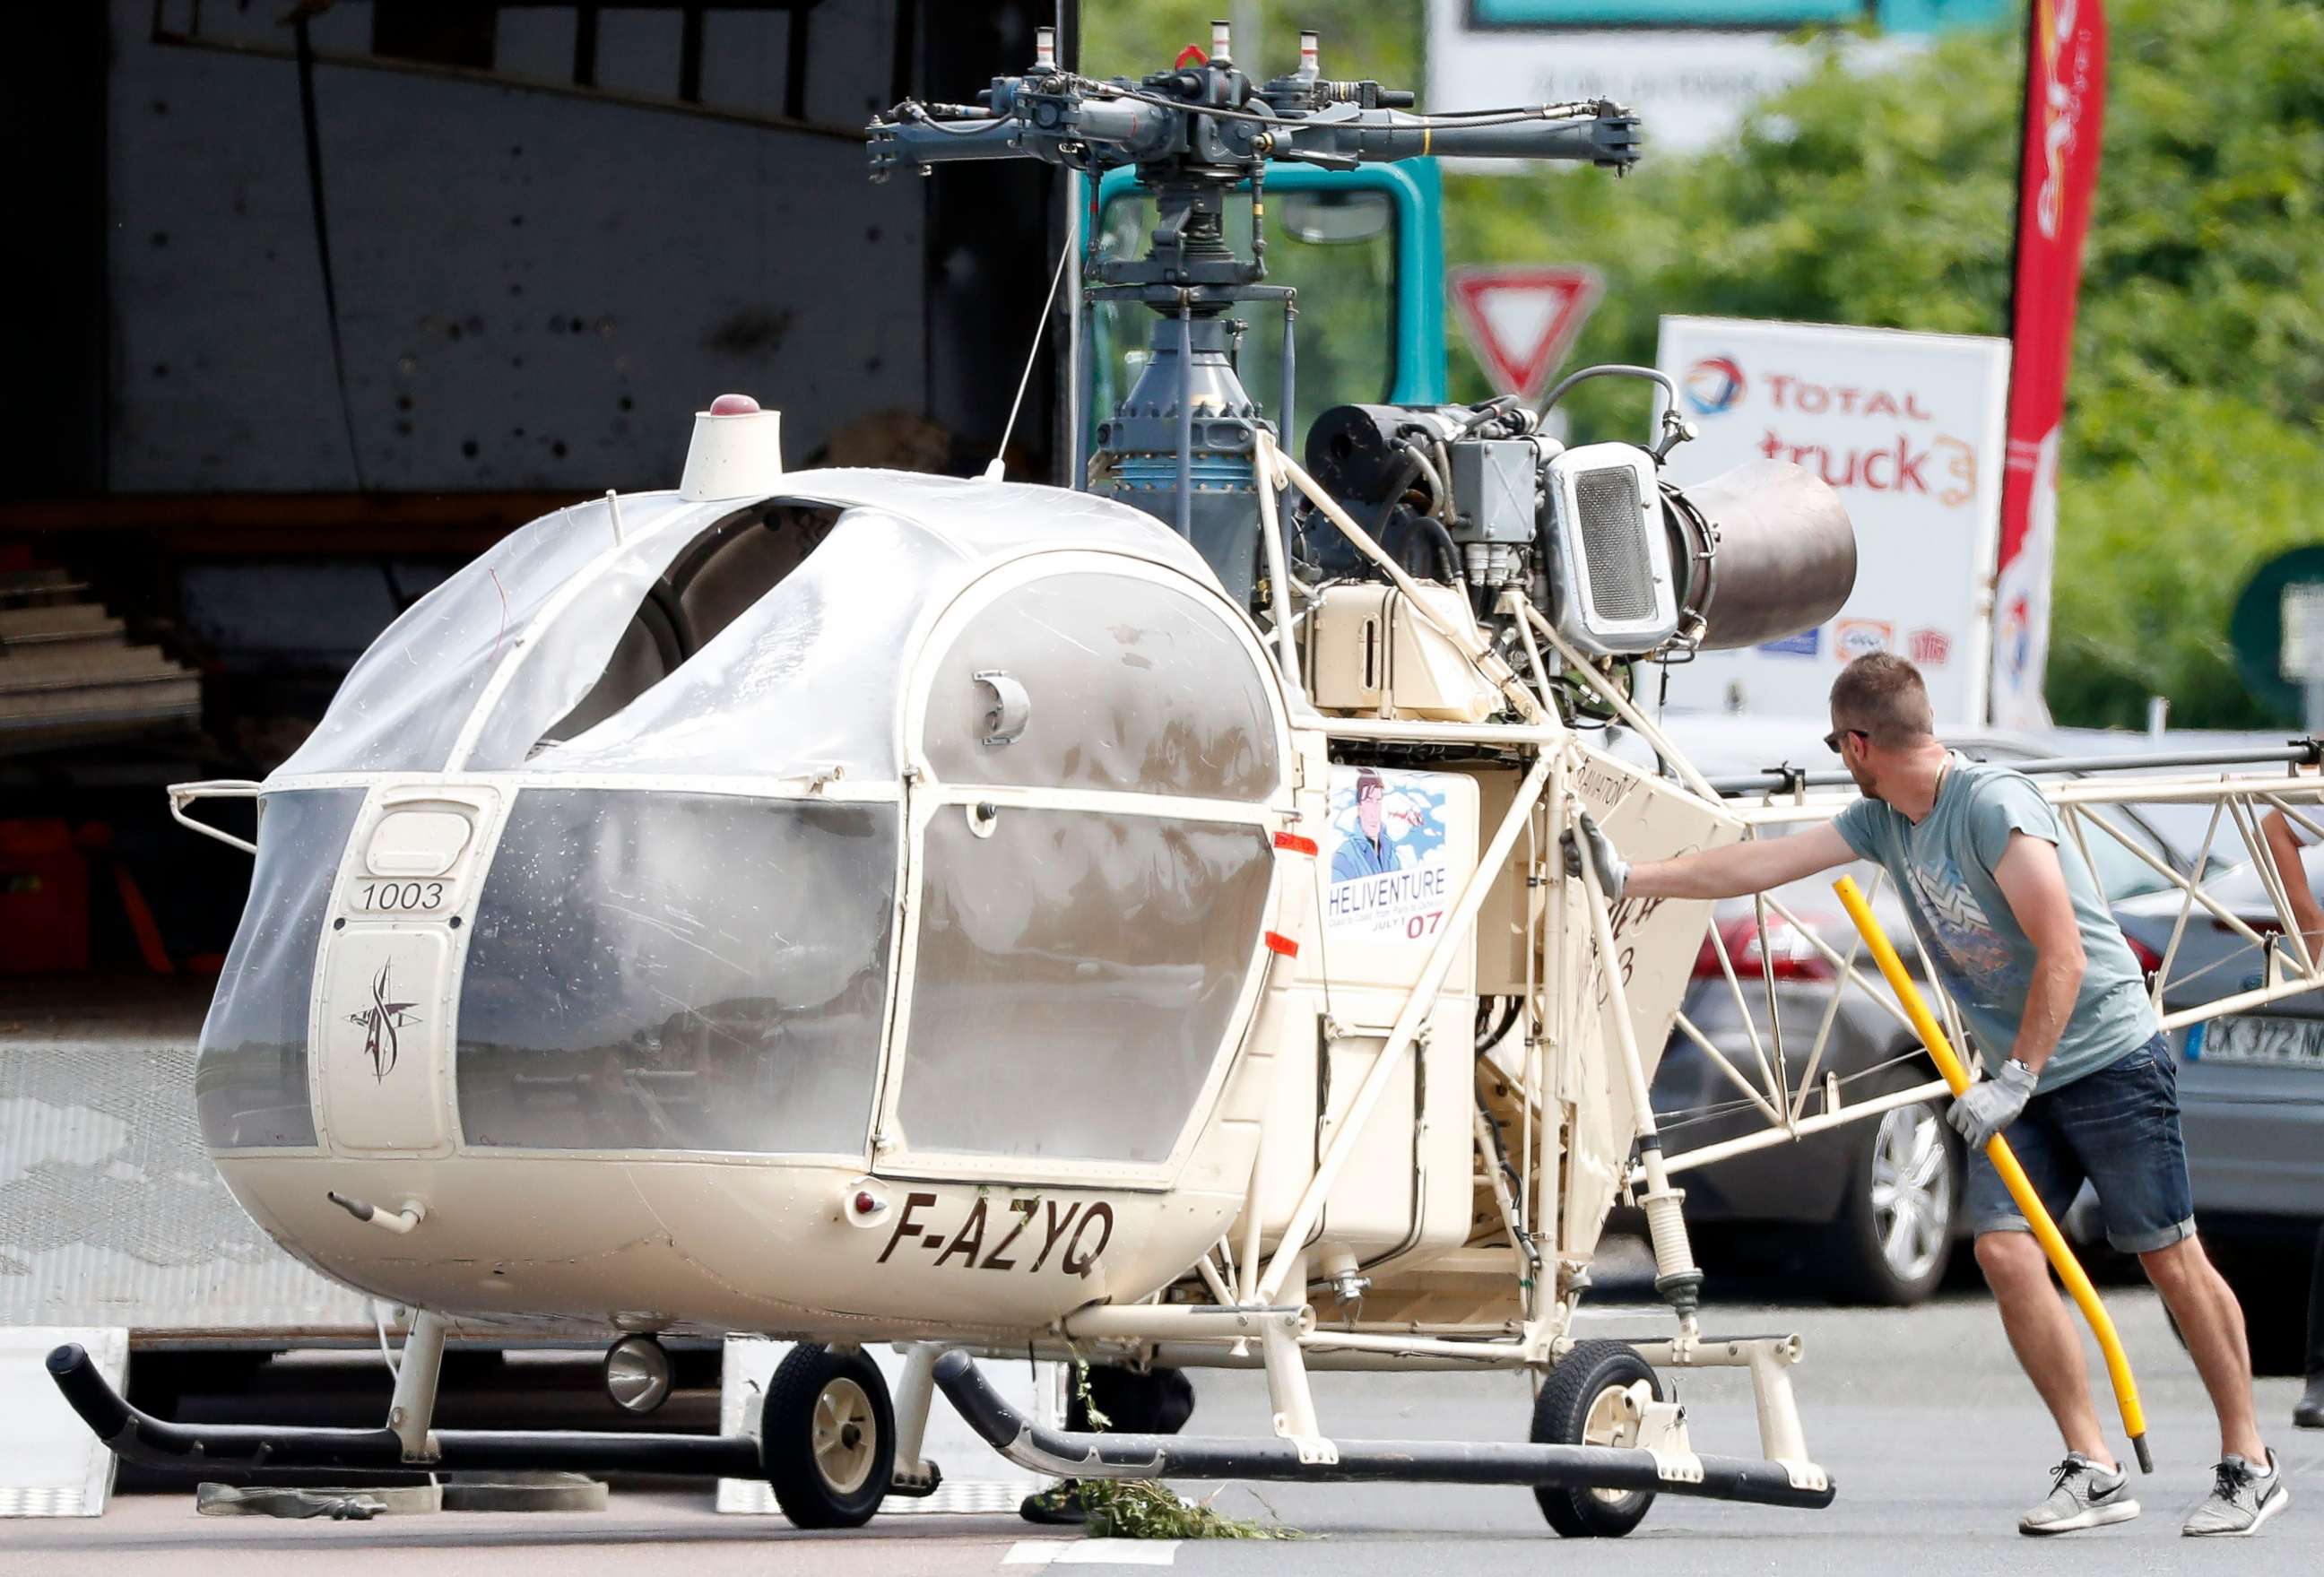 PHOTO: Investigators transport an Alouette II helicopter allegedly abandoned by French prisoner Redoine Faid and suspected accomplices after his escape from the prison of Reau, in Gonesse, north of Paris, July 1, 2018.